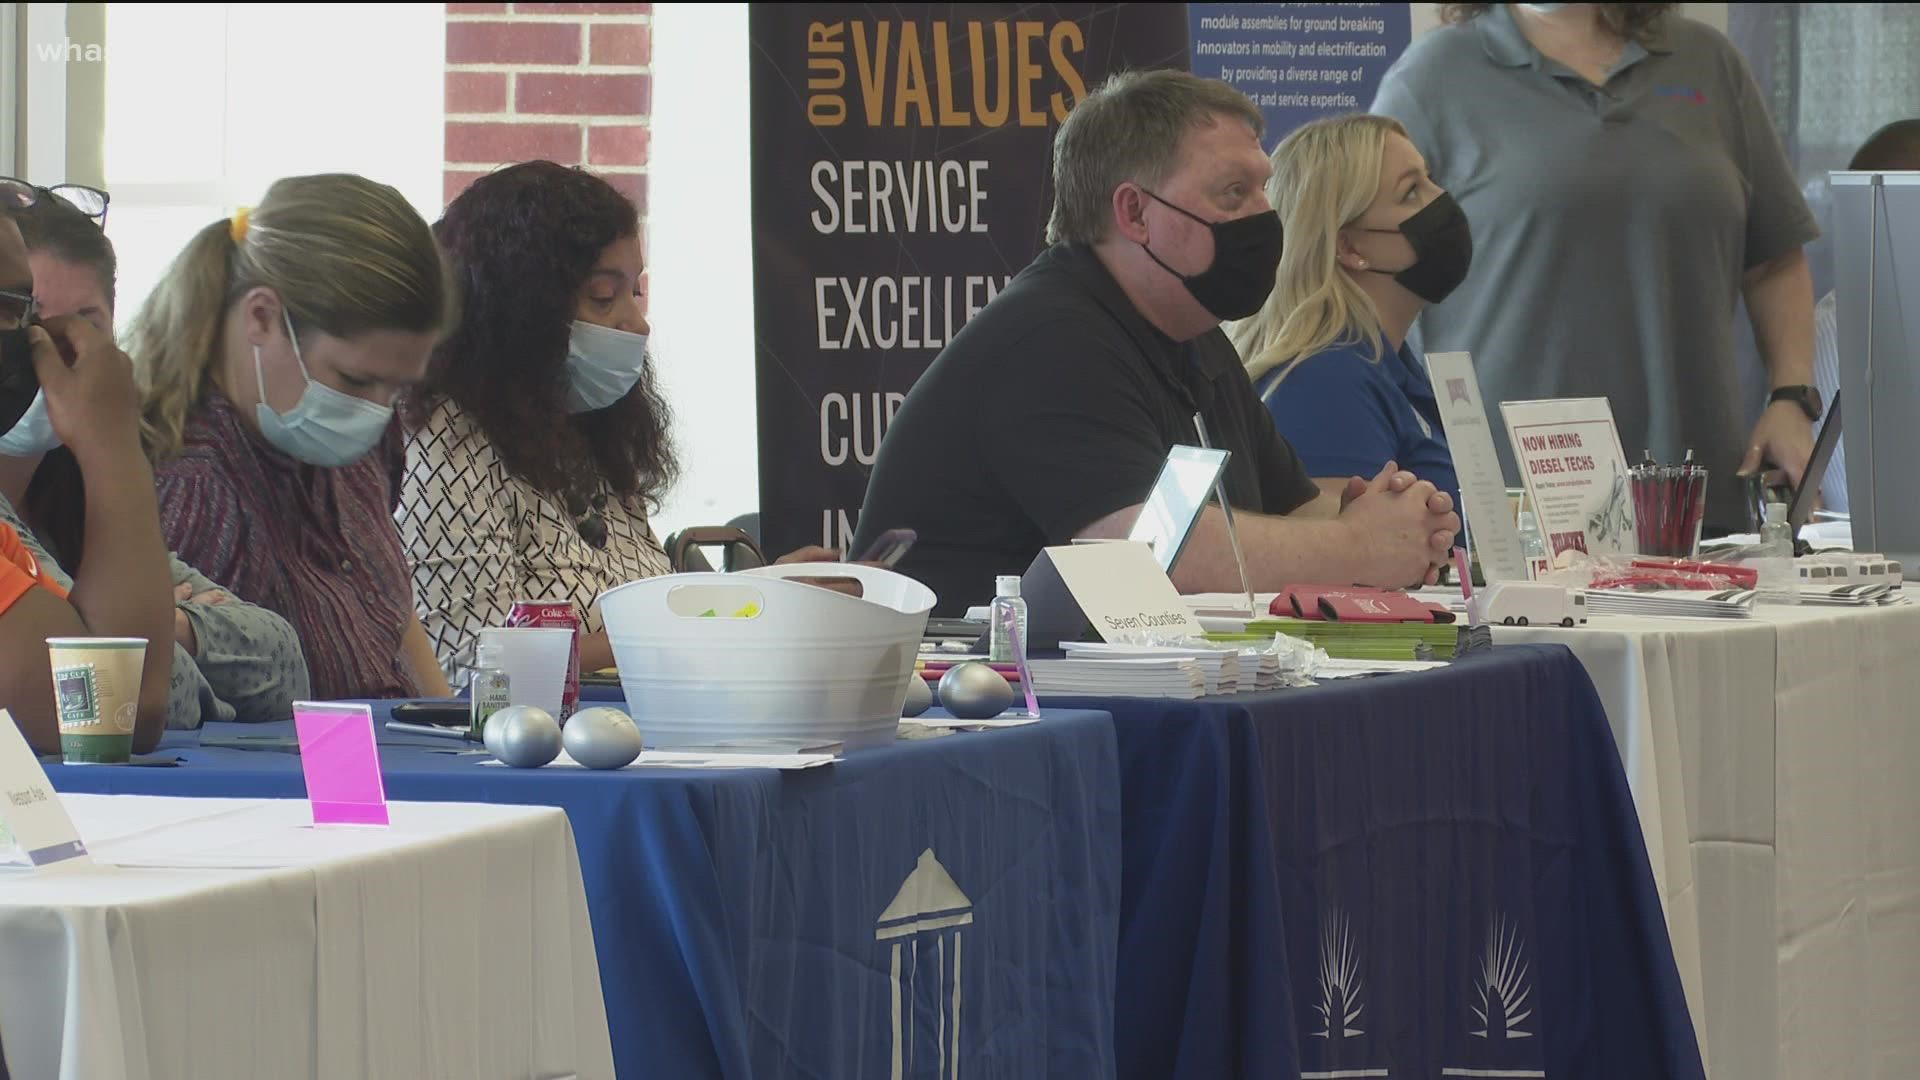 The hiring event featured more than 35 companies, offering everything from entry level positions to experienced management roles.